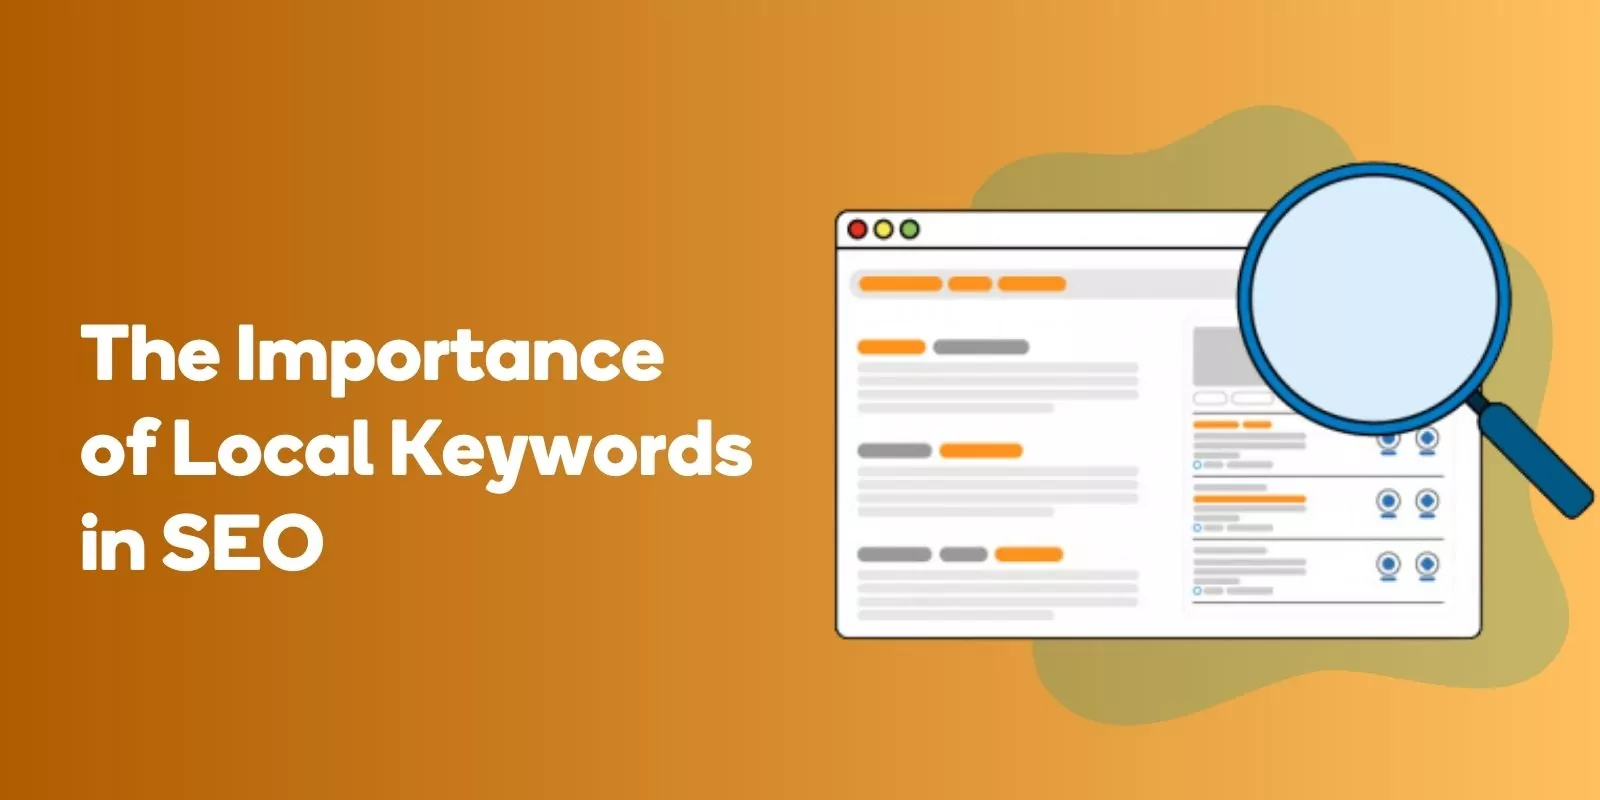 The Importance of Local Keywords in SEO